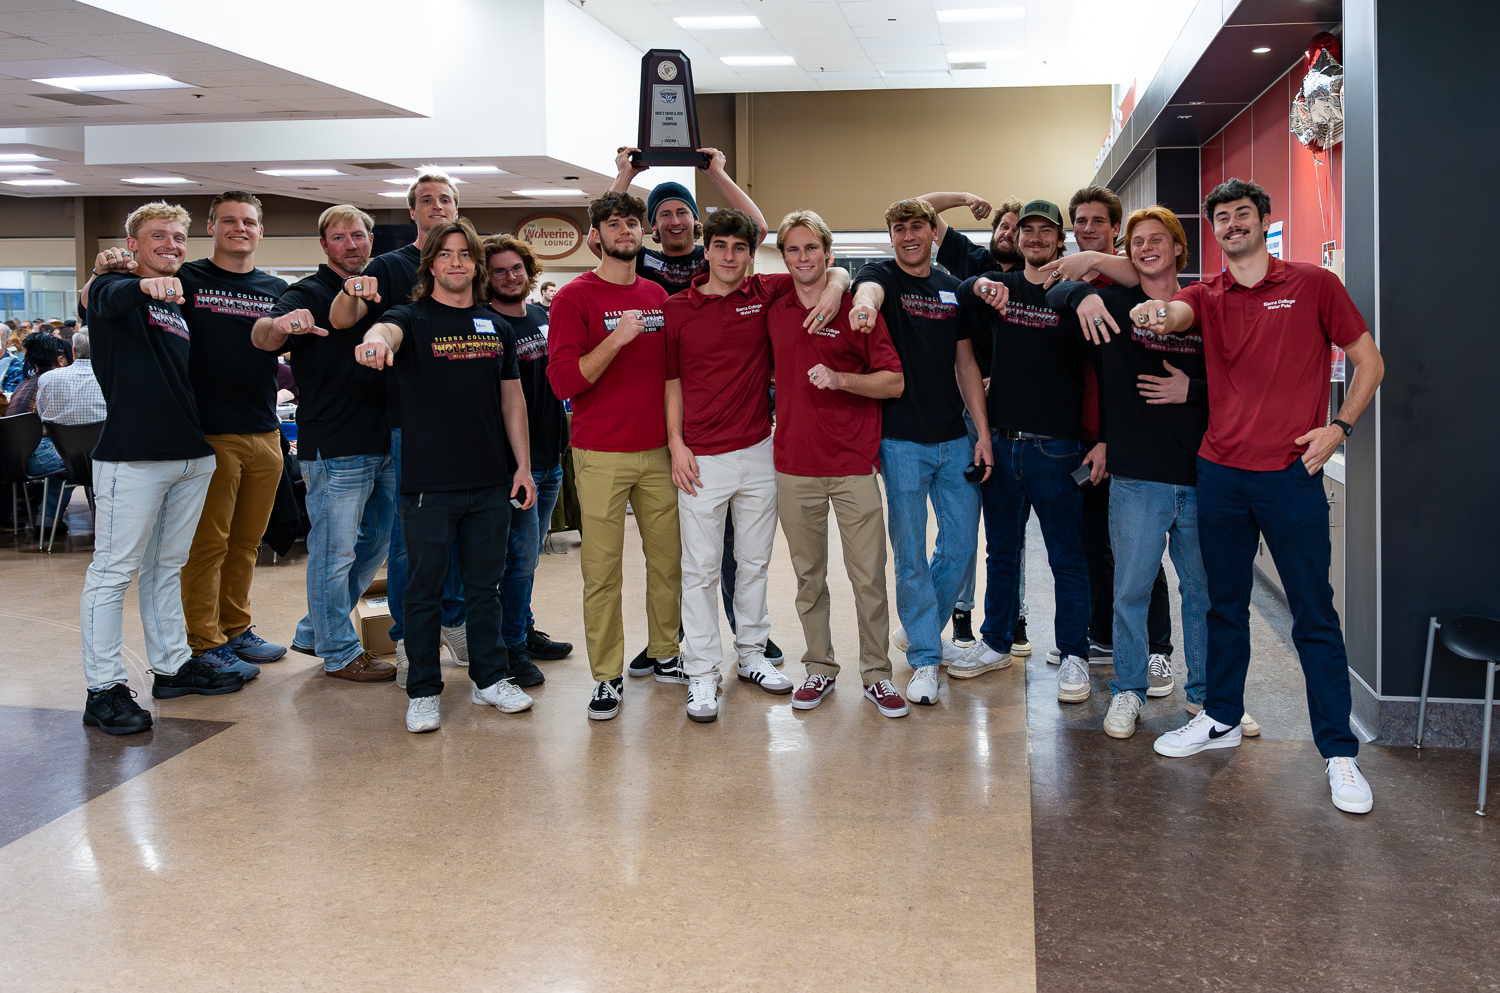 Men's Swim and Dive group shot with state champ rings and trophy.